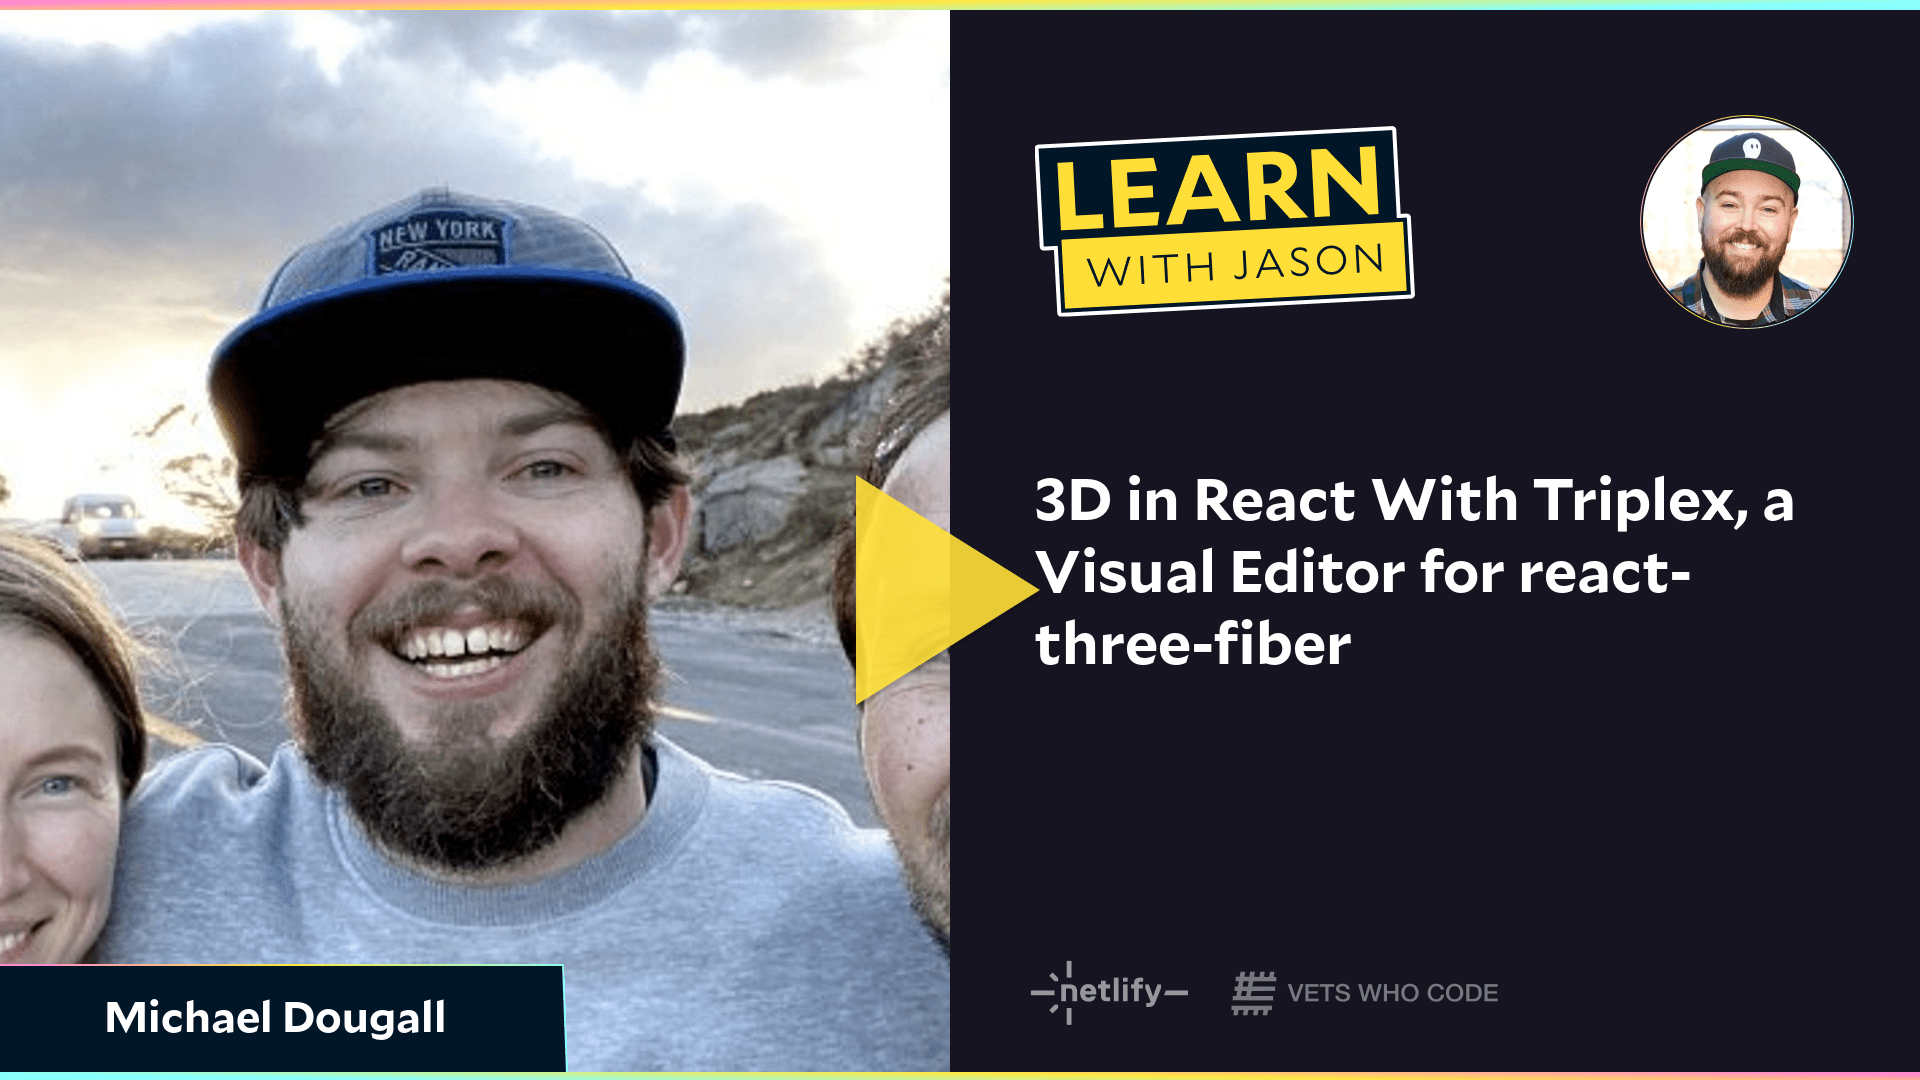 3D in React With Triplex, a Visual Editor for react-three-fiber (with Michael Dougall)